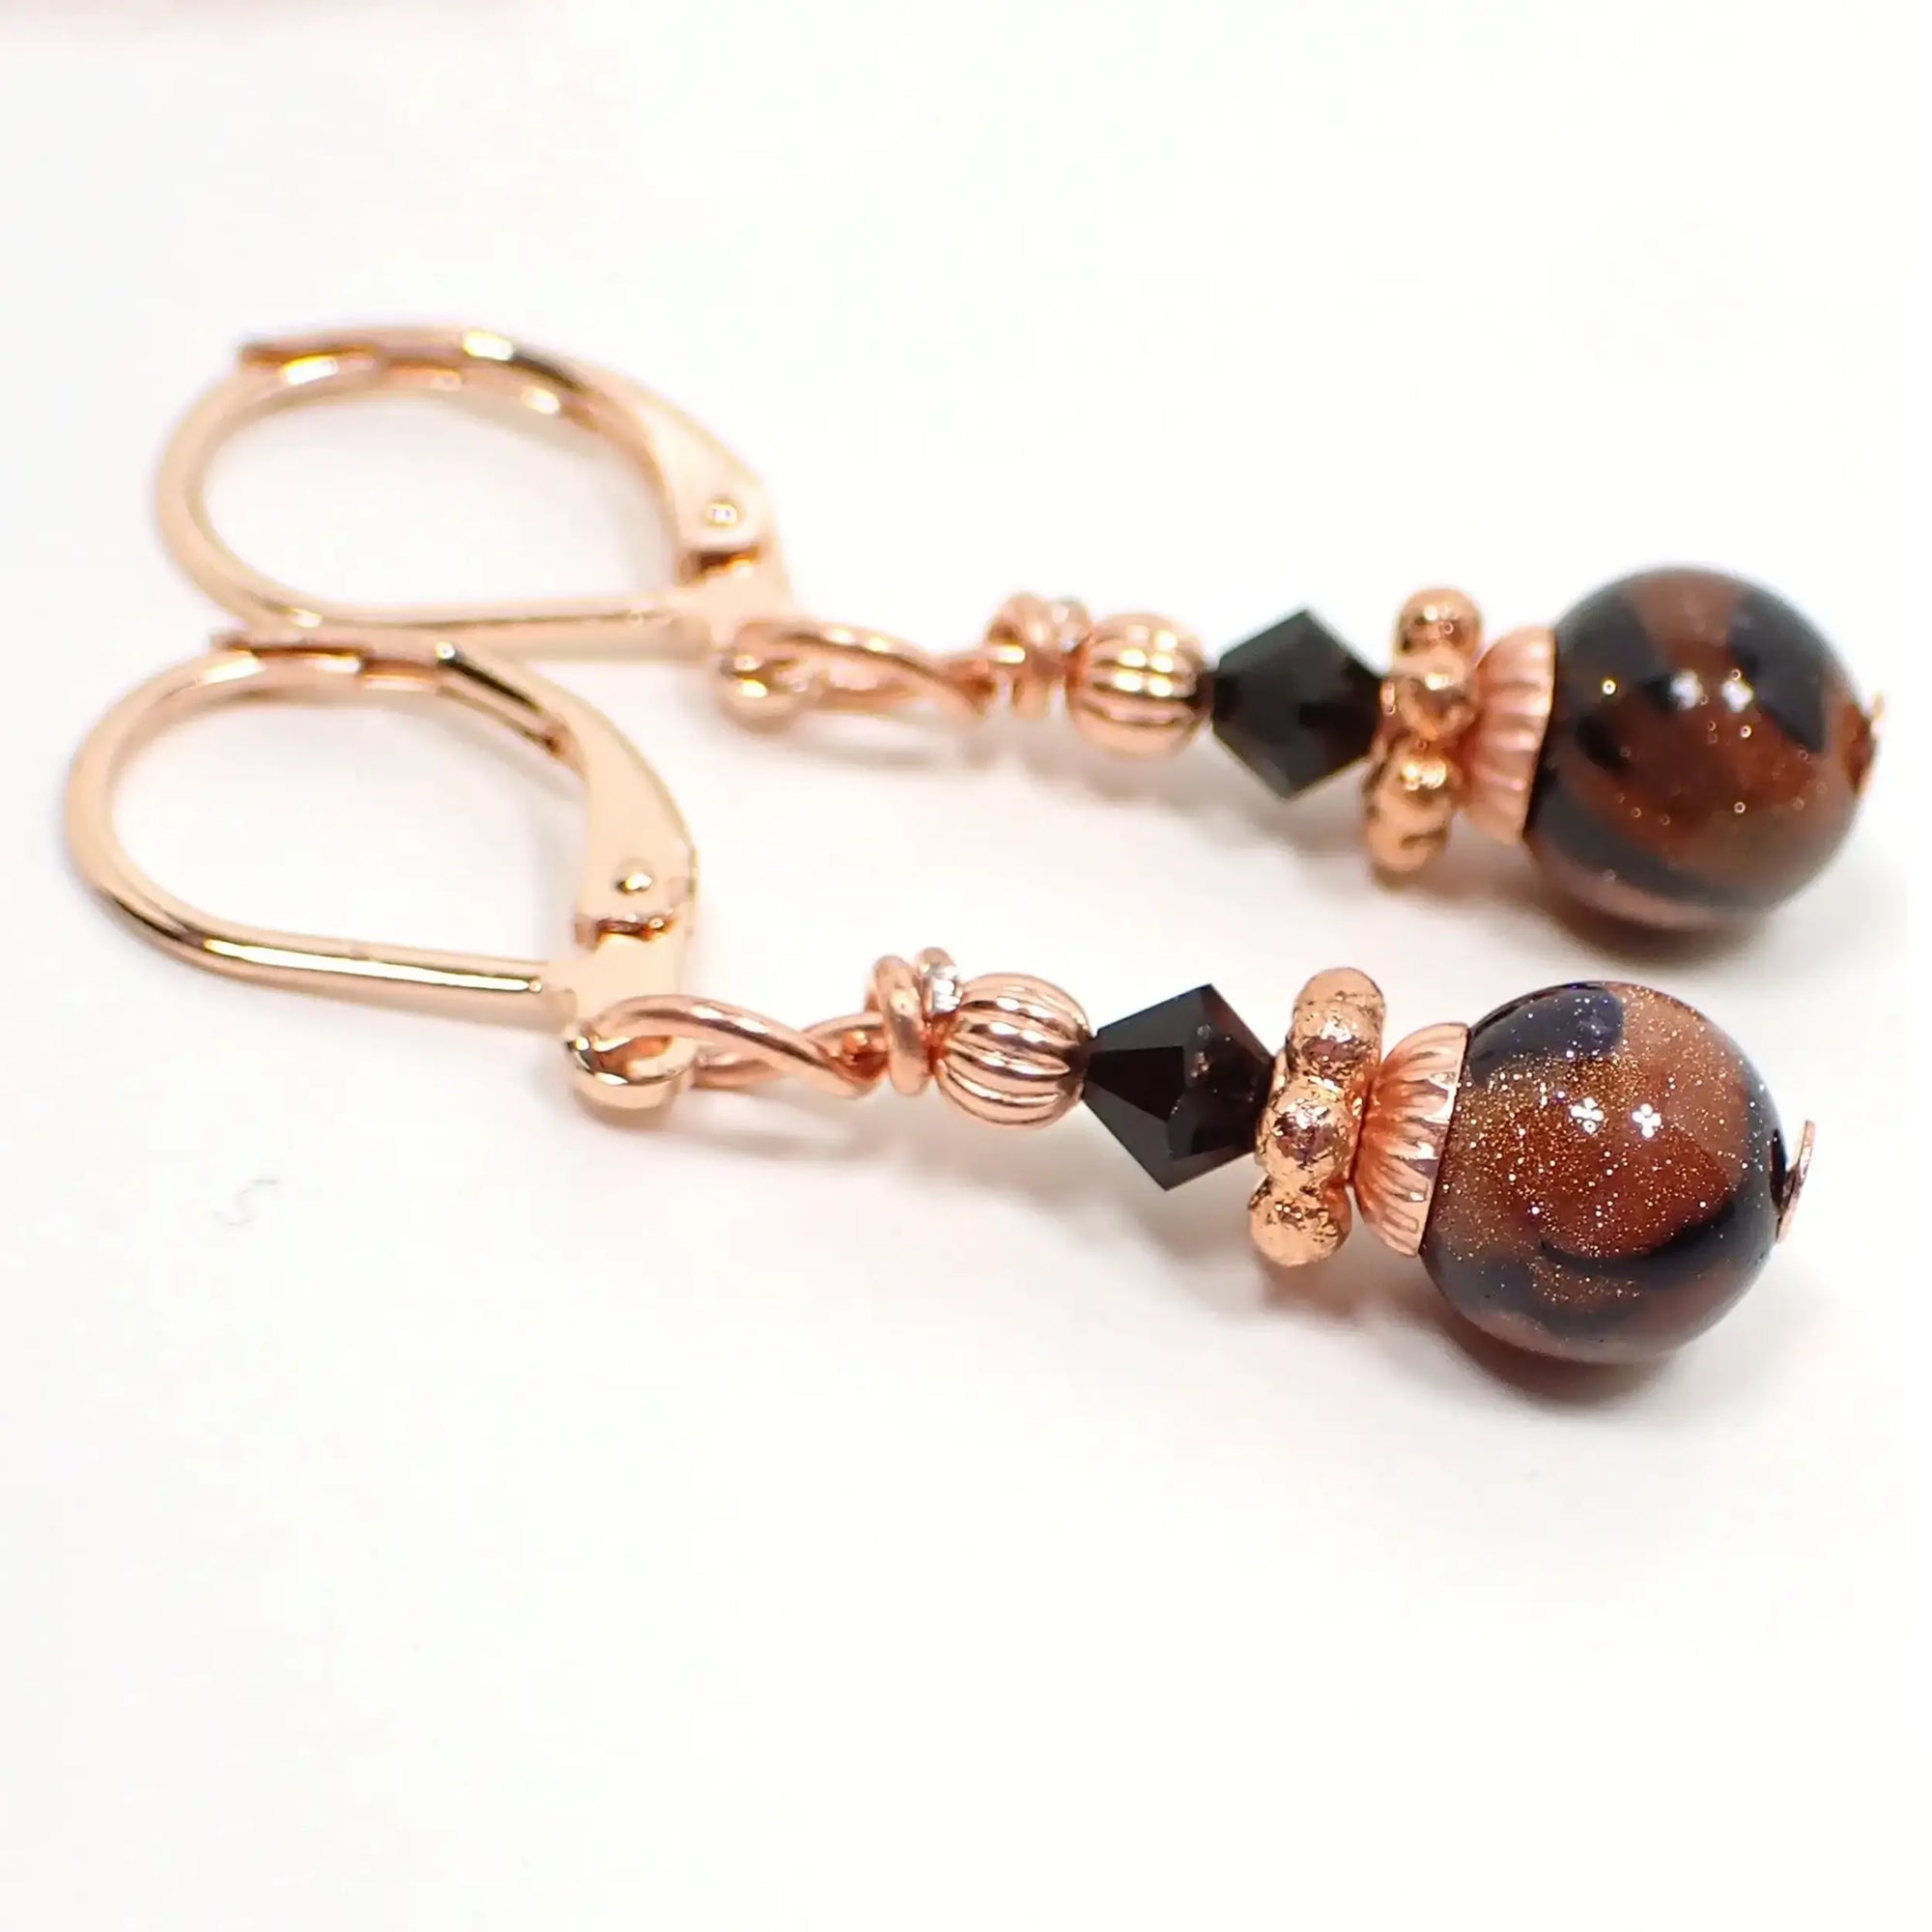 Side view of the handmade goldstone drop earrings. They have bright copper color and rose gold color beads and findings for a copper with hint of pink design. There are faceted black crystal glass bicone beads at the top and small round ball goldstone beads at the bottom. The goldstone beads are marbled with orange glass that has tiny flecks of copper and black.